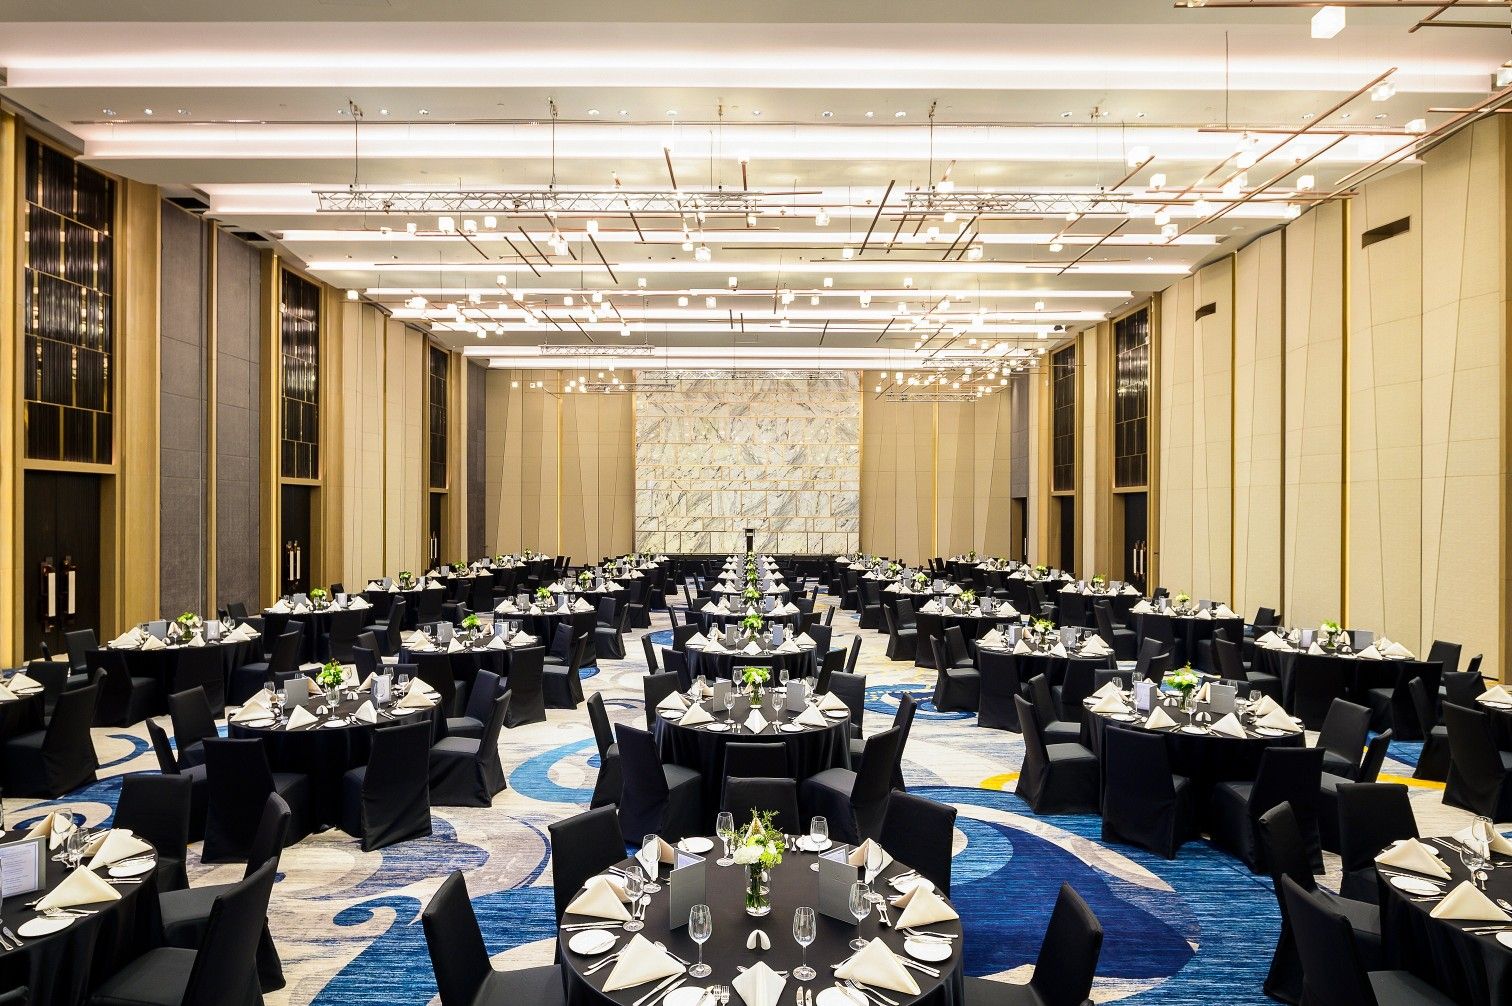 The event took place in the Fuji Grand Ballroom